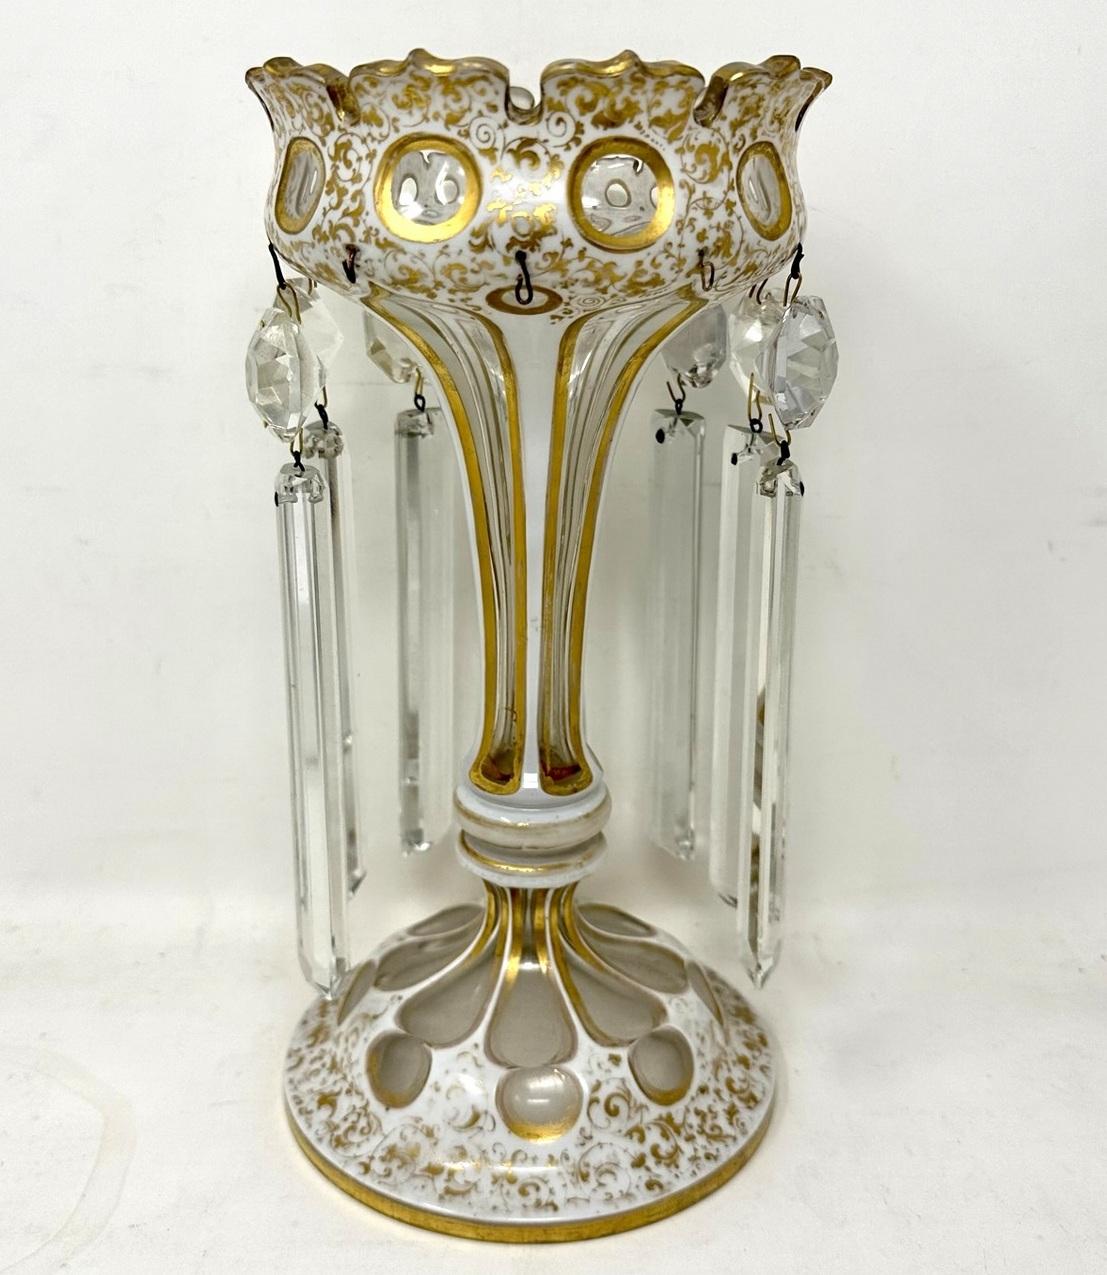 Hand-Crafted Antique Crystal Bohemian Cream Gilt Enamel Lusters Lustres Candlestick Vase For Sale